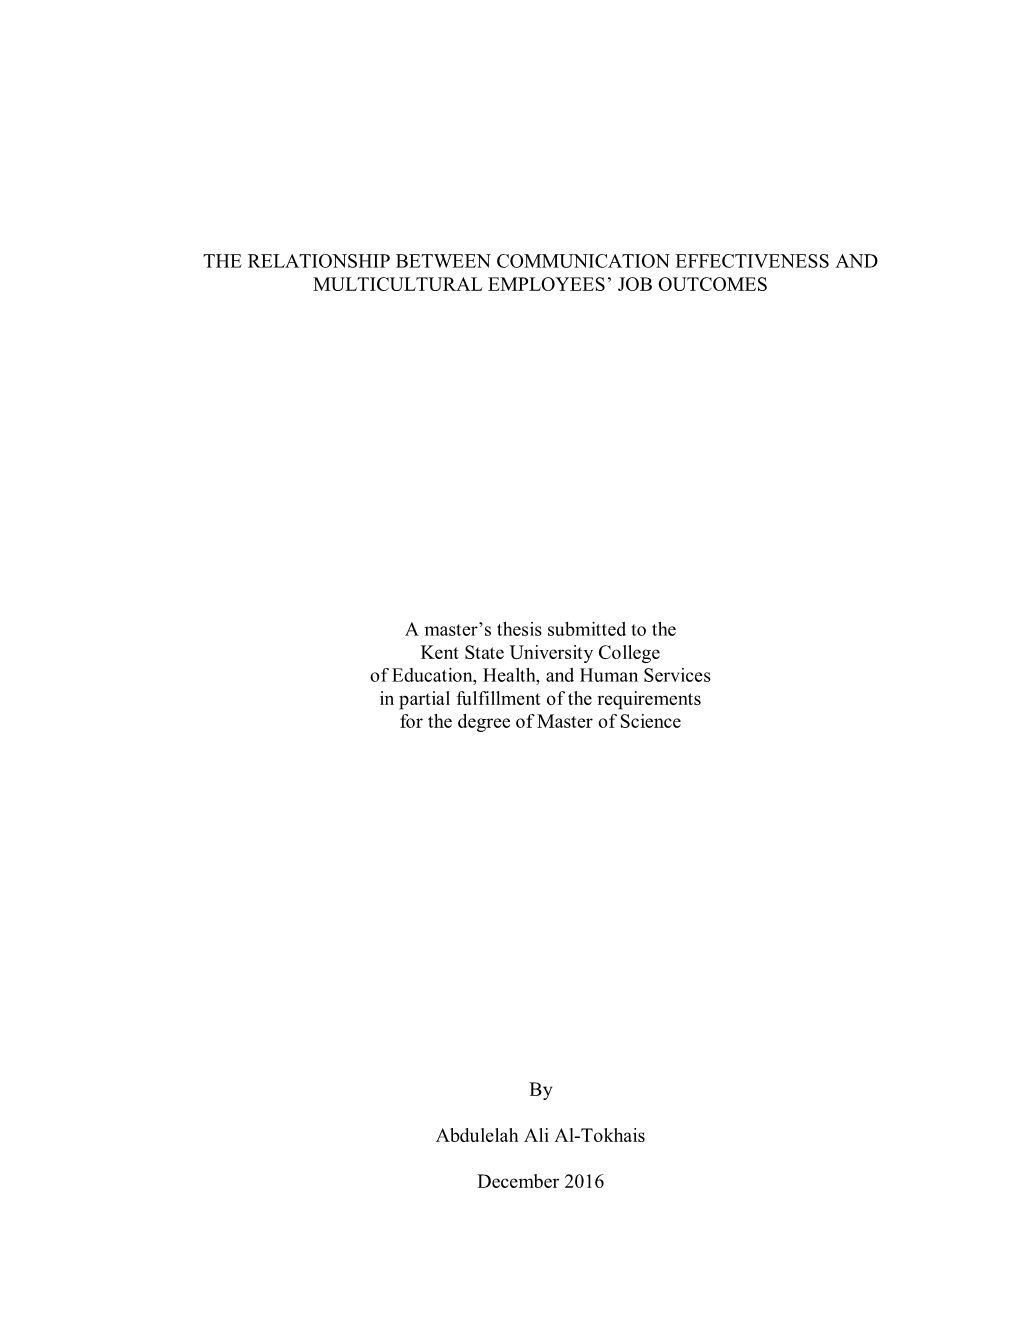 THE RELATIONSHIP BETWEEN COMMUNICATION EFFECTIVENESS and MULTICULTURAL EMPLOYEES' JOB OUTCOMES a Master's Thesis Submitted T